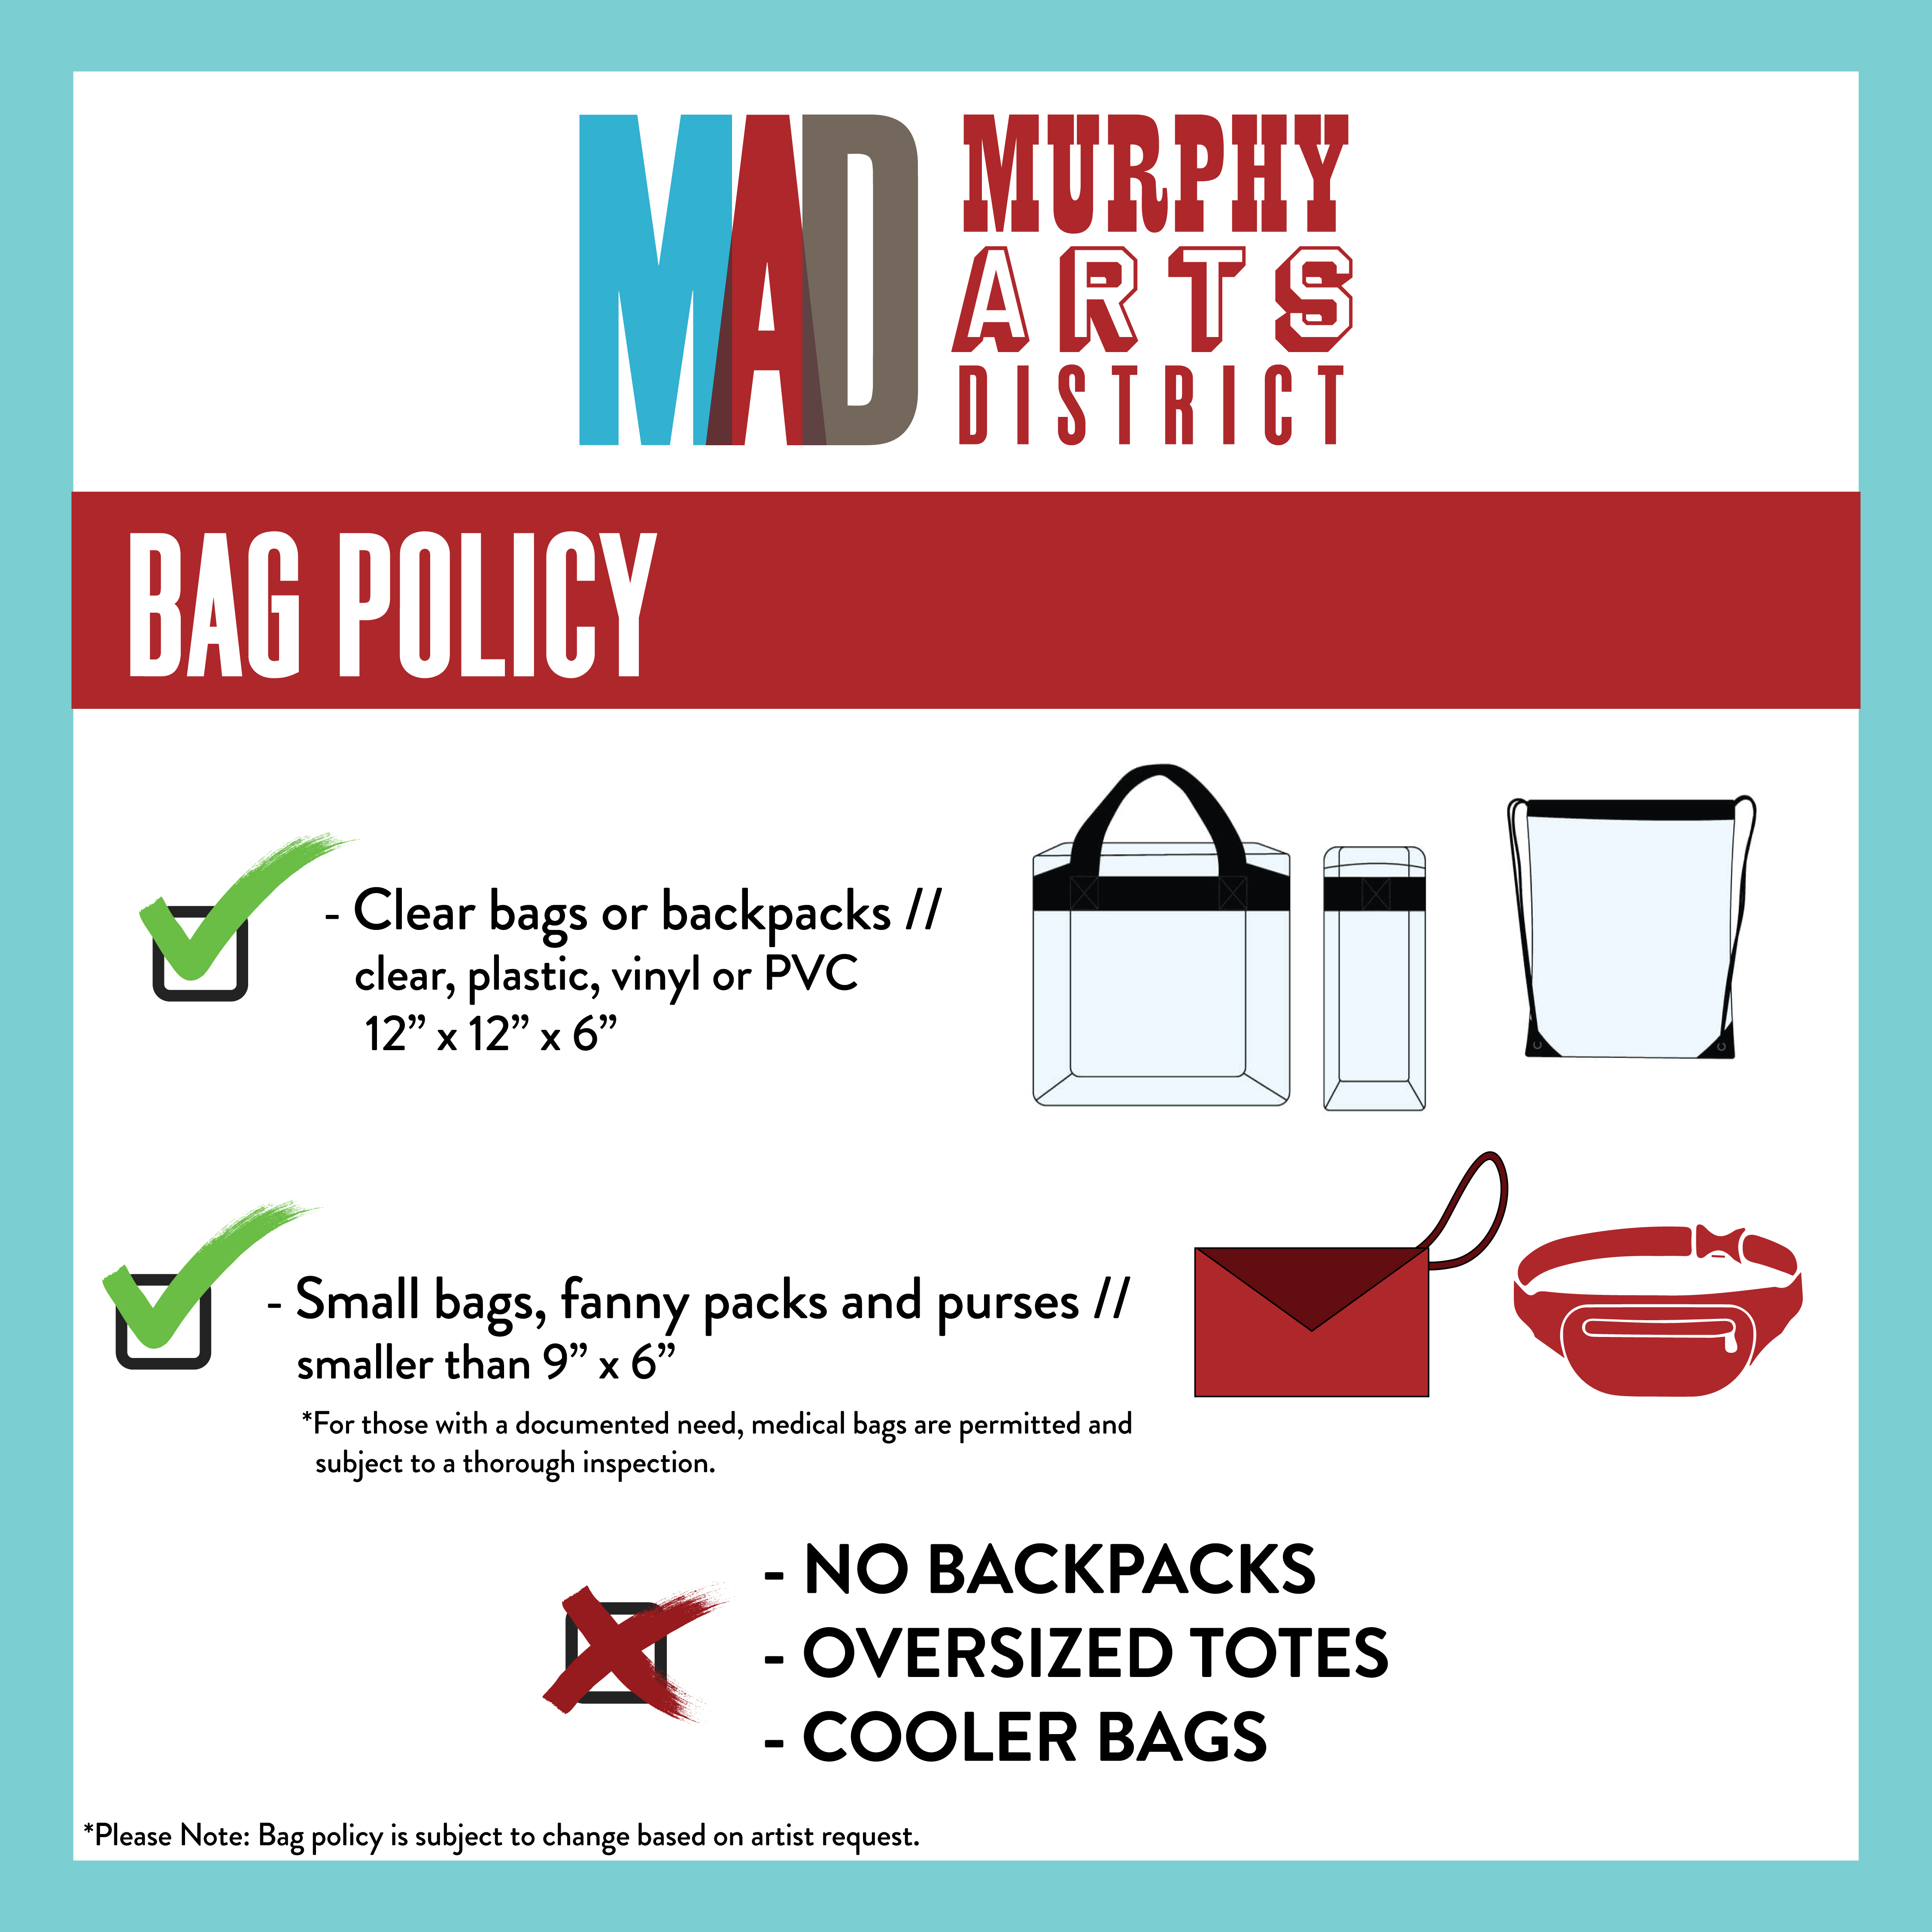 New Bag Policy